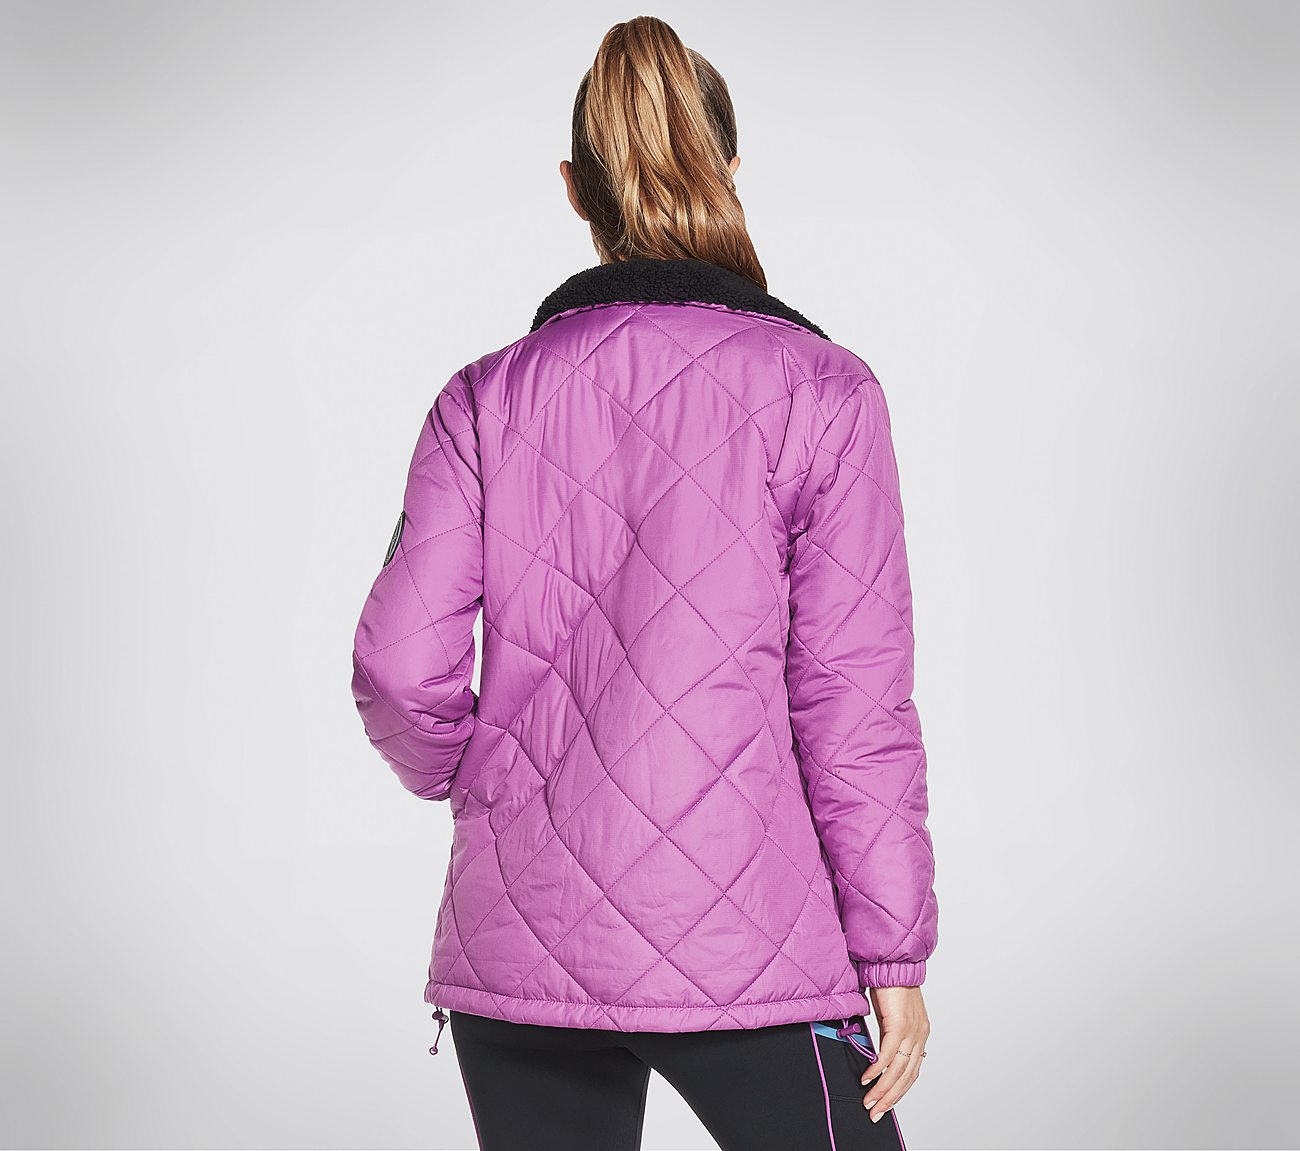  JOURNEY PUFFER JACKET, PURPLE/HOT PINK Apparels Top View